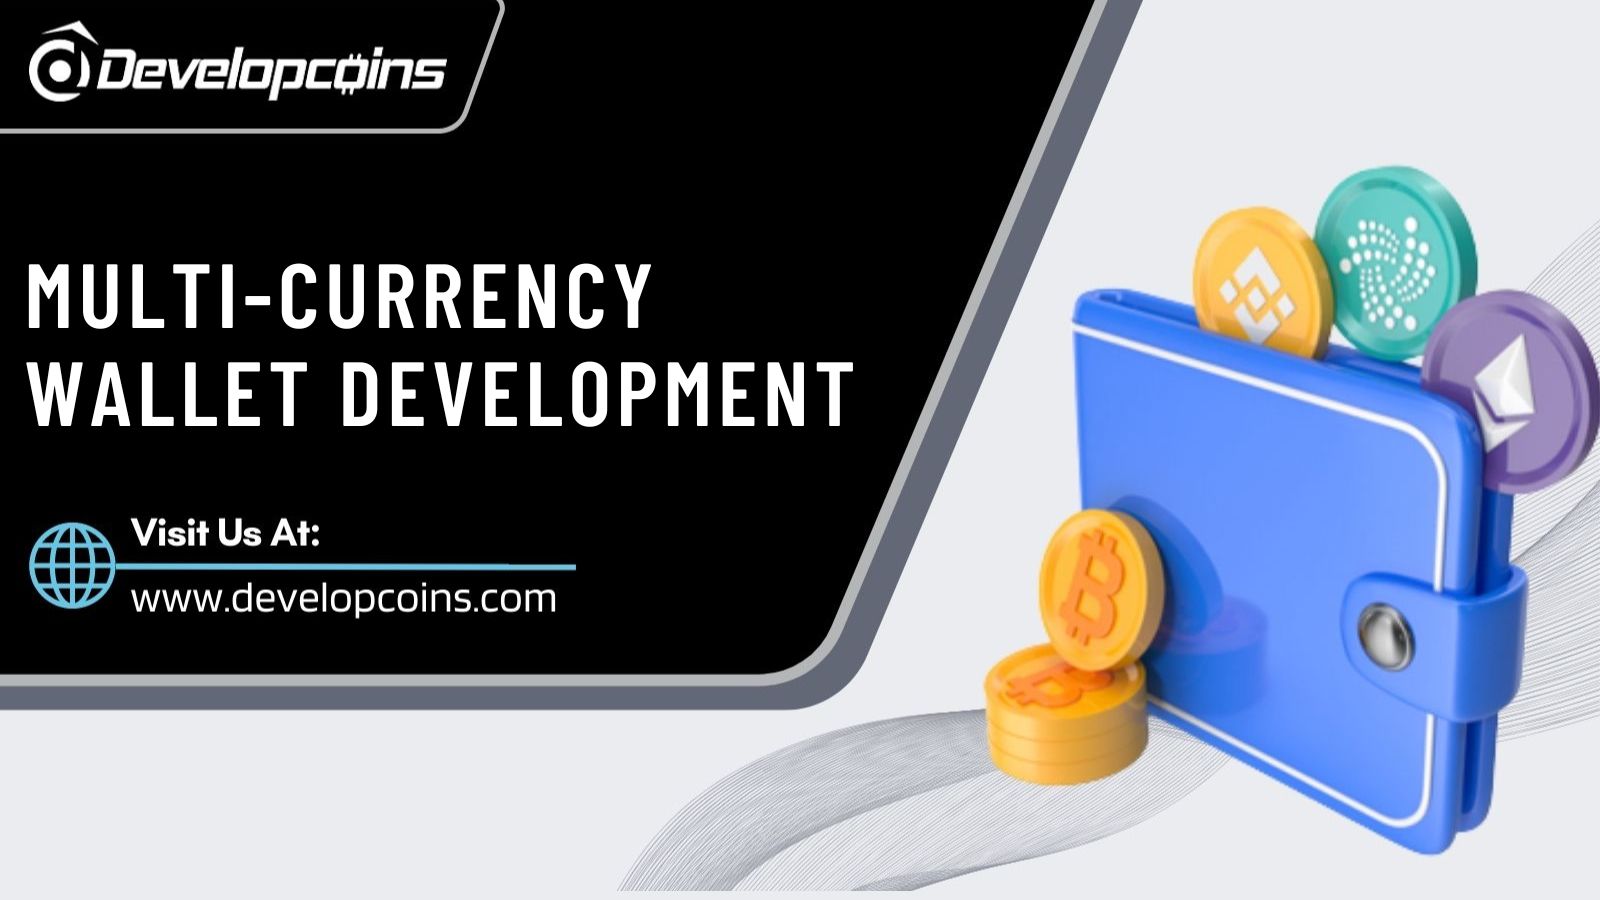 Multicurrency Wallet Development - A Solution To Manage Multiple Digital Assets Smartly